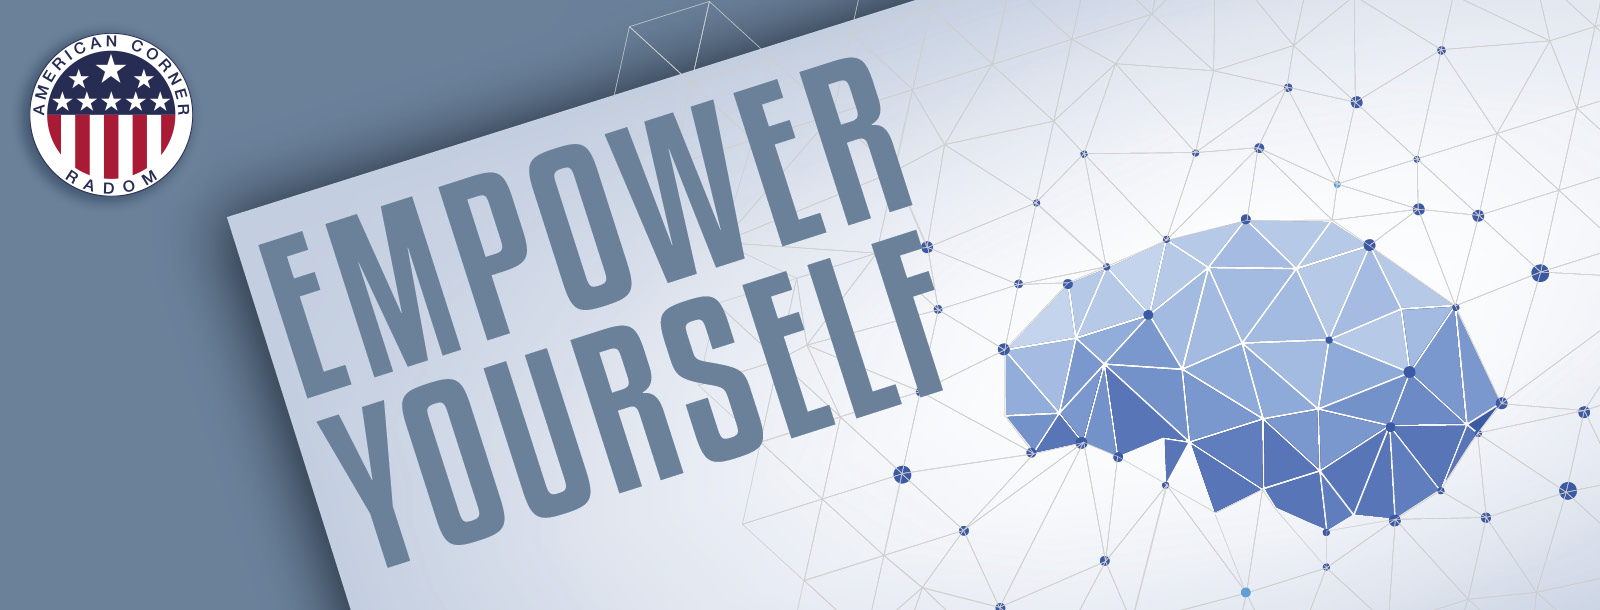 Empower yourself - the art of learning, part II